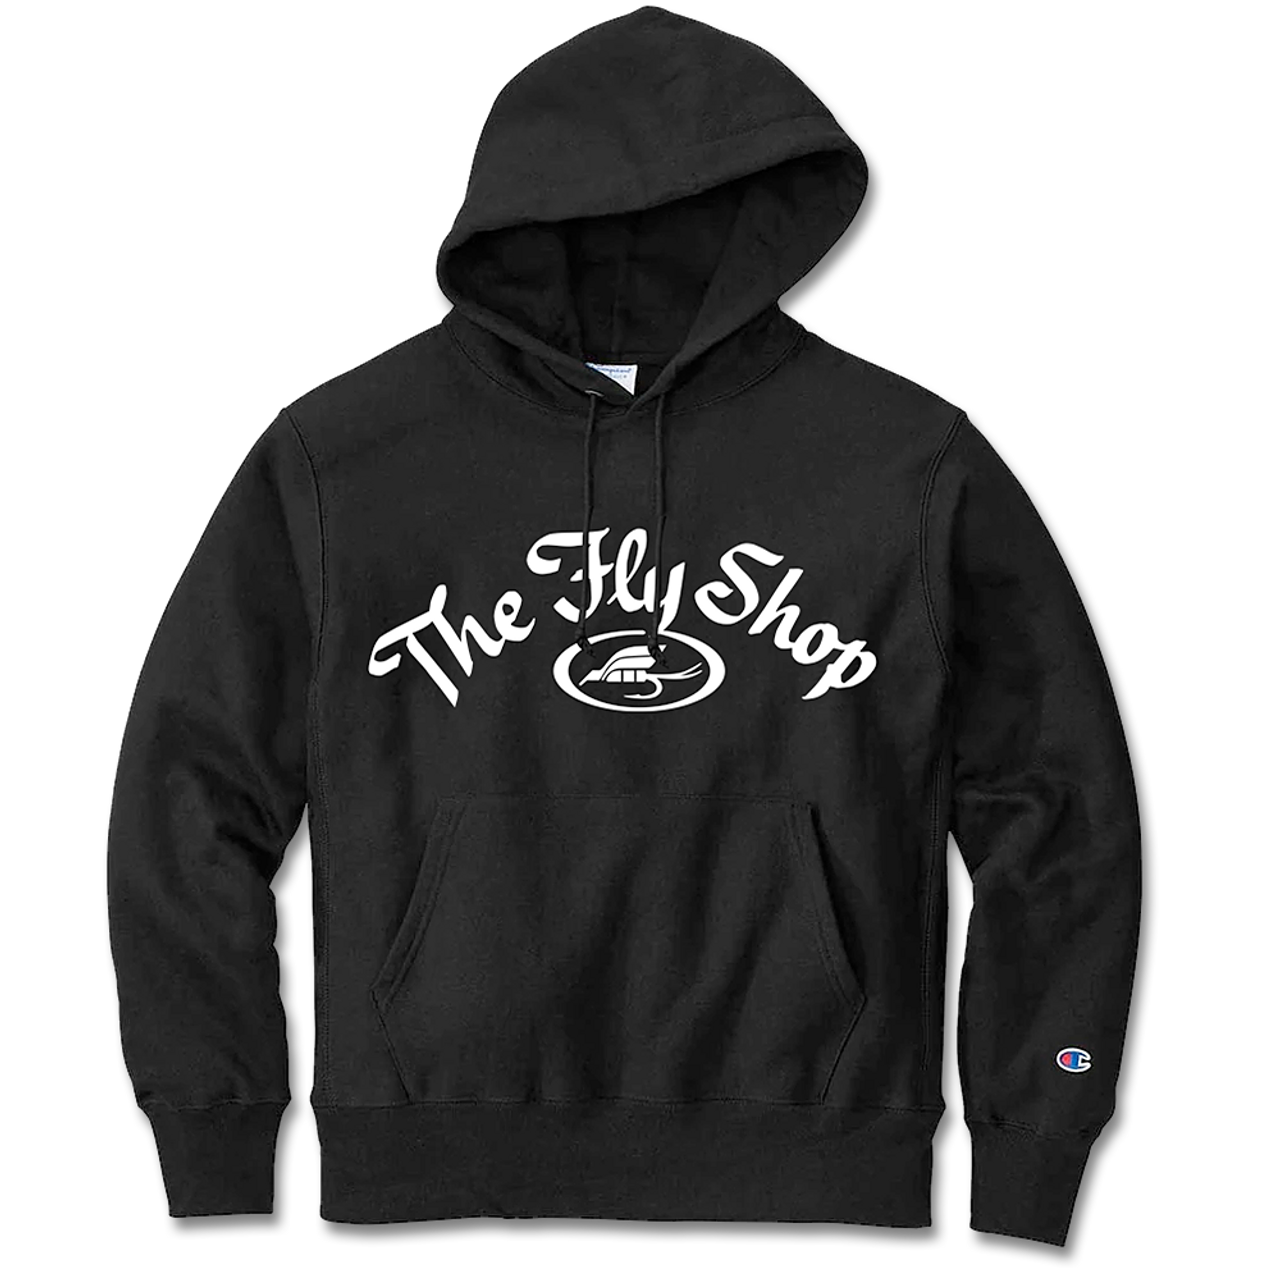 The Fly Shop's Champion Reverse Weave Hoodie